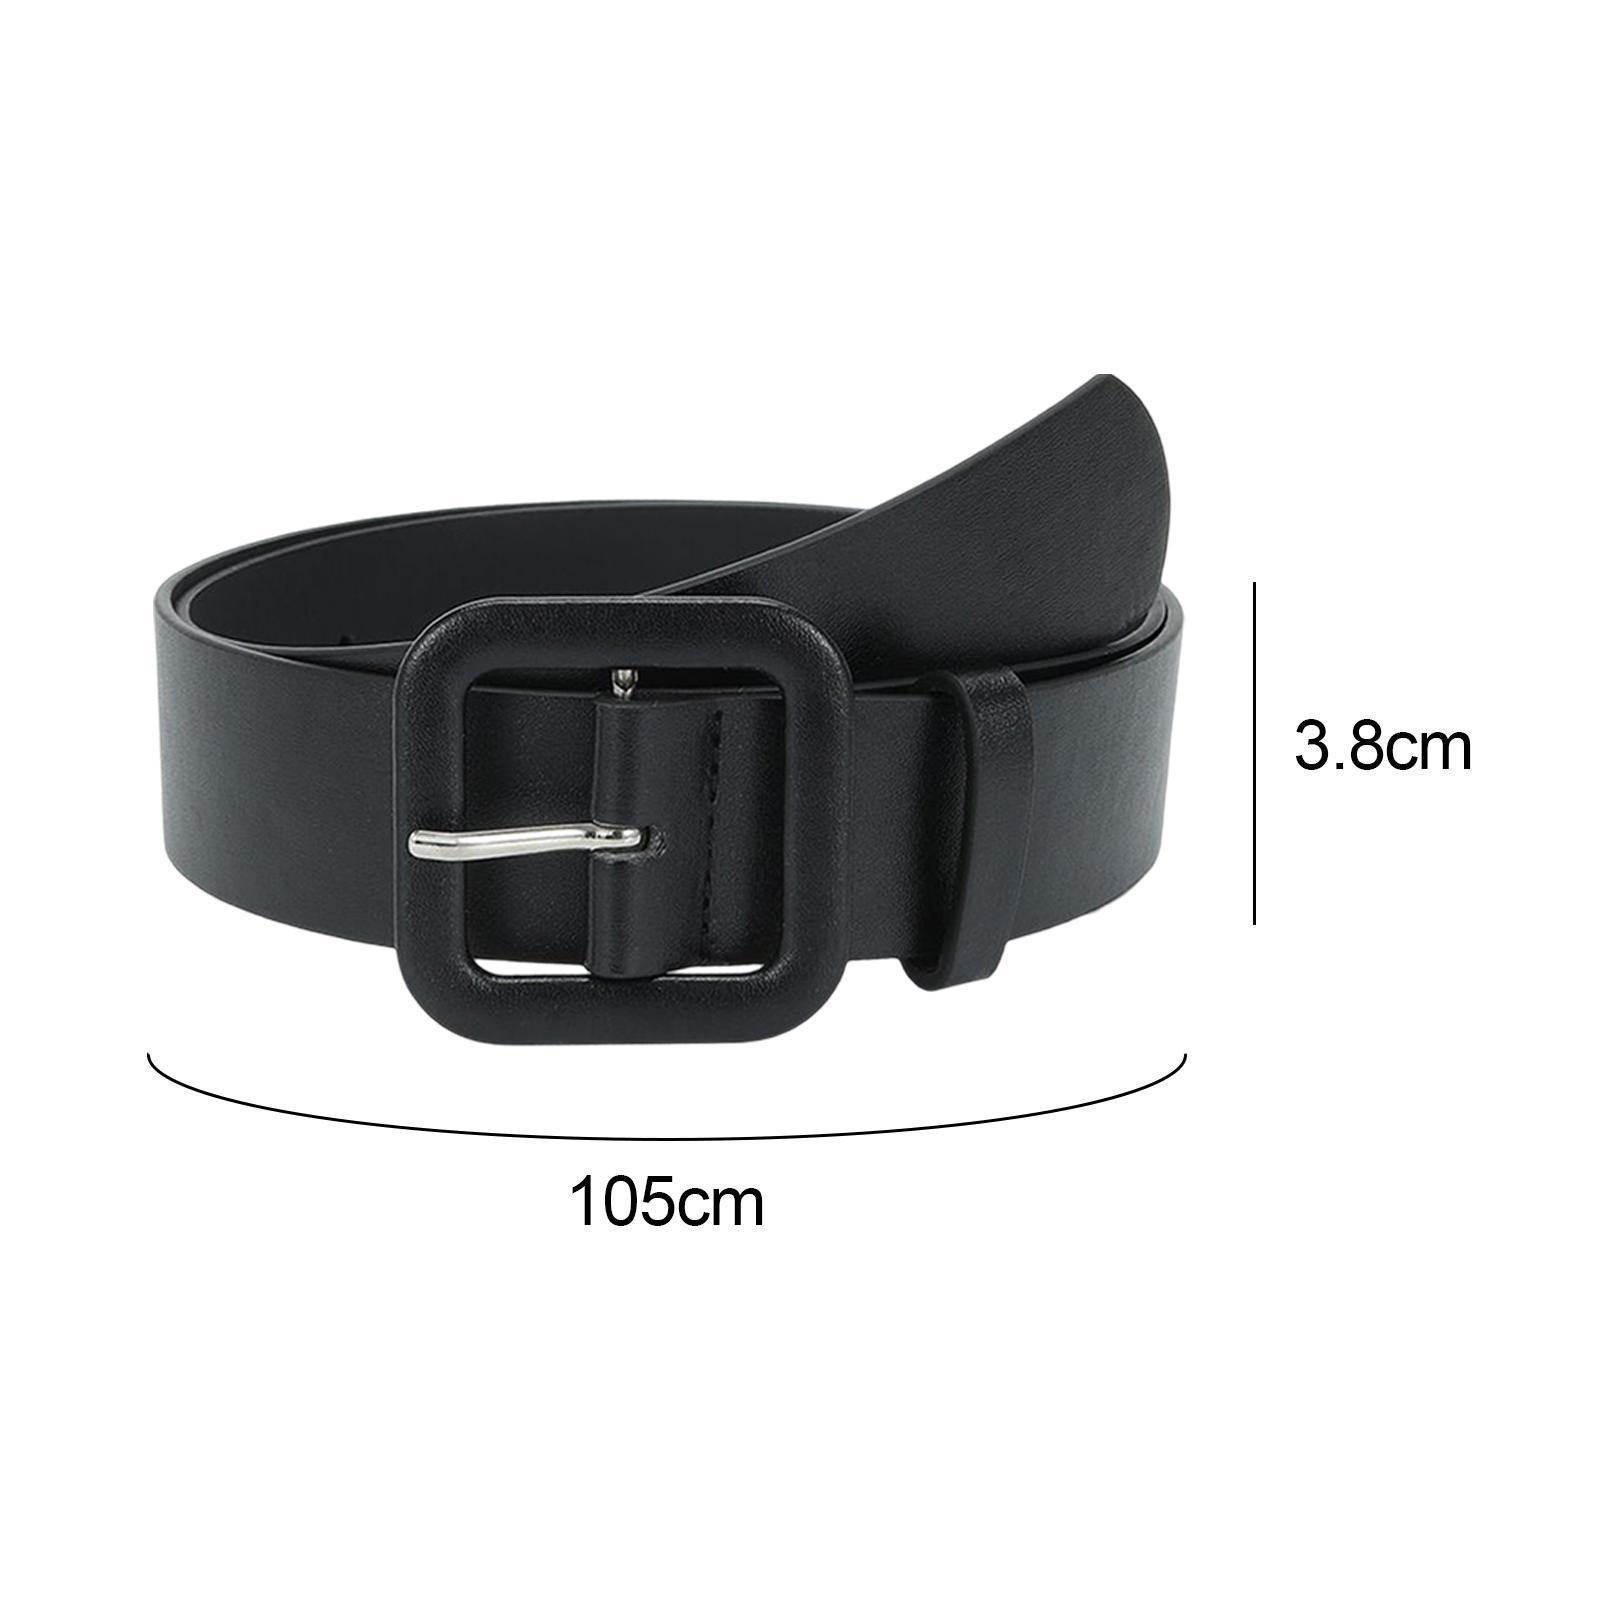 Female Waistband Ladies Dress Jeans Strap Decor Solid Pin Buckle Belt PU Leather Belt for Pants